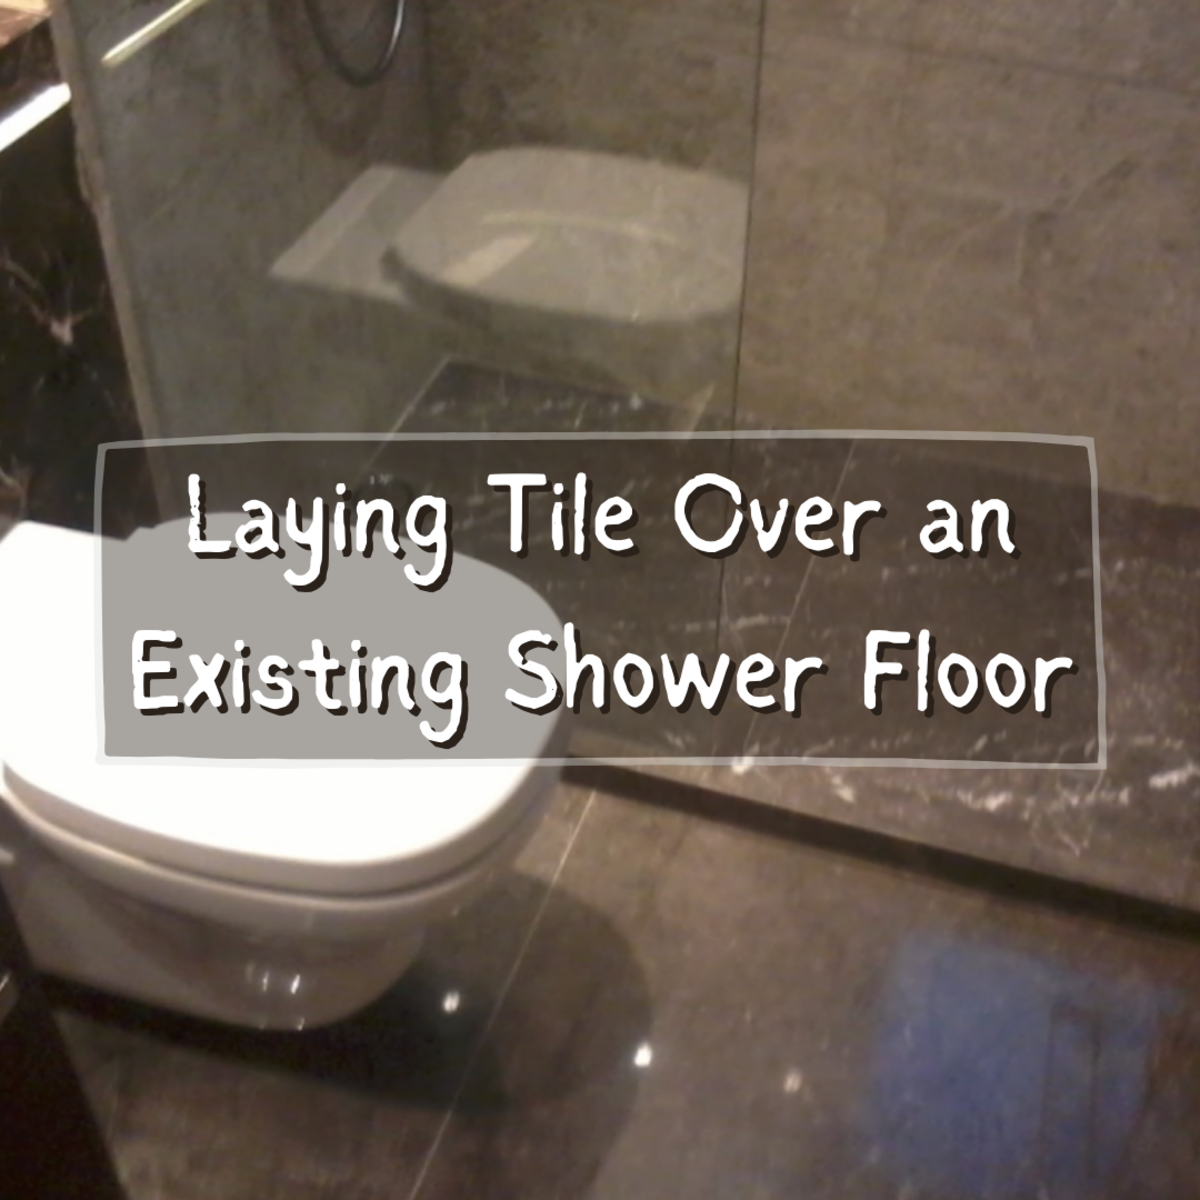 Read on to learn how to tile over an existing shower floor! A new tile shower floor helped transform this common bathroom into a work of art.